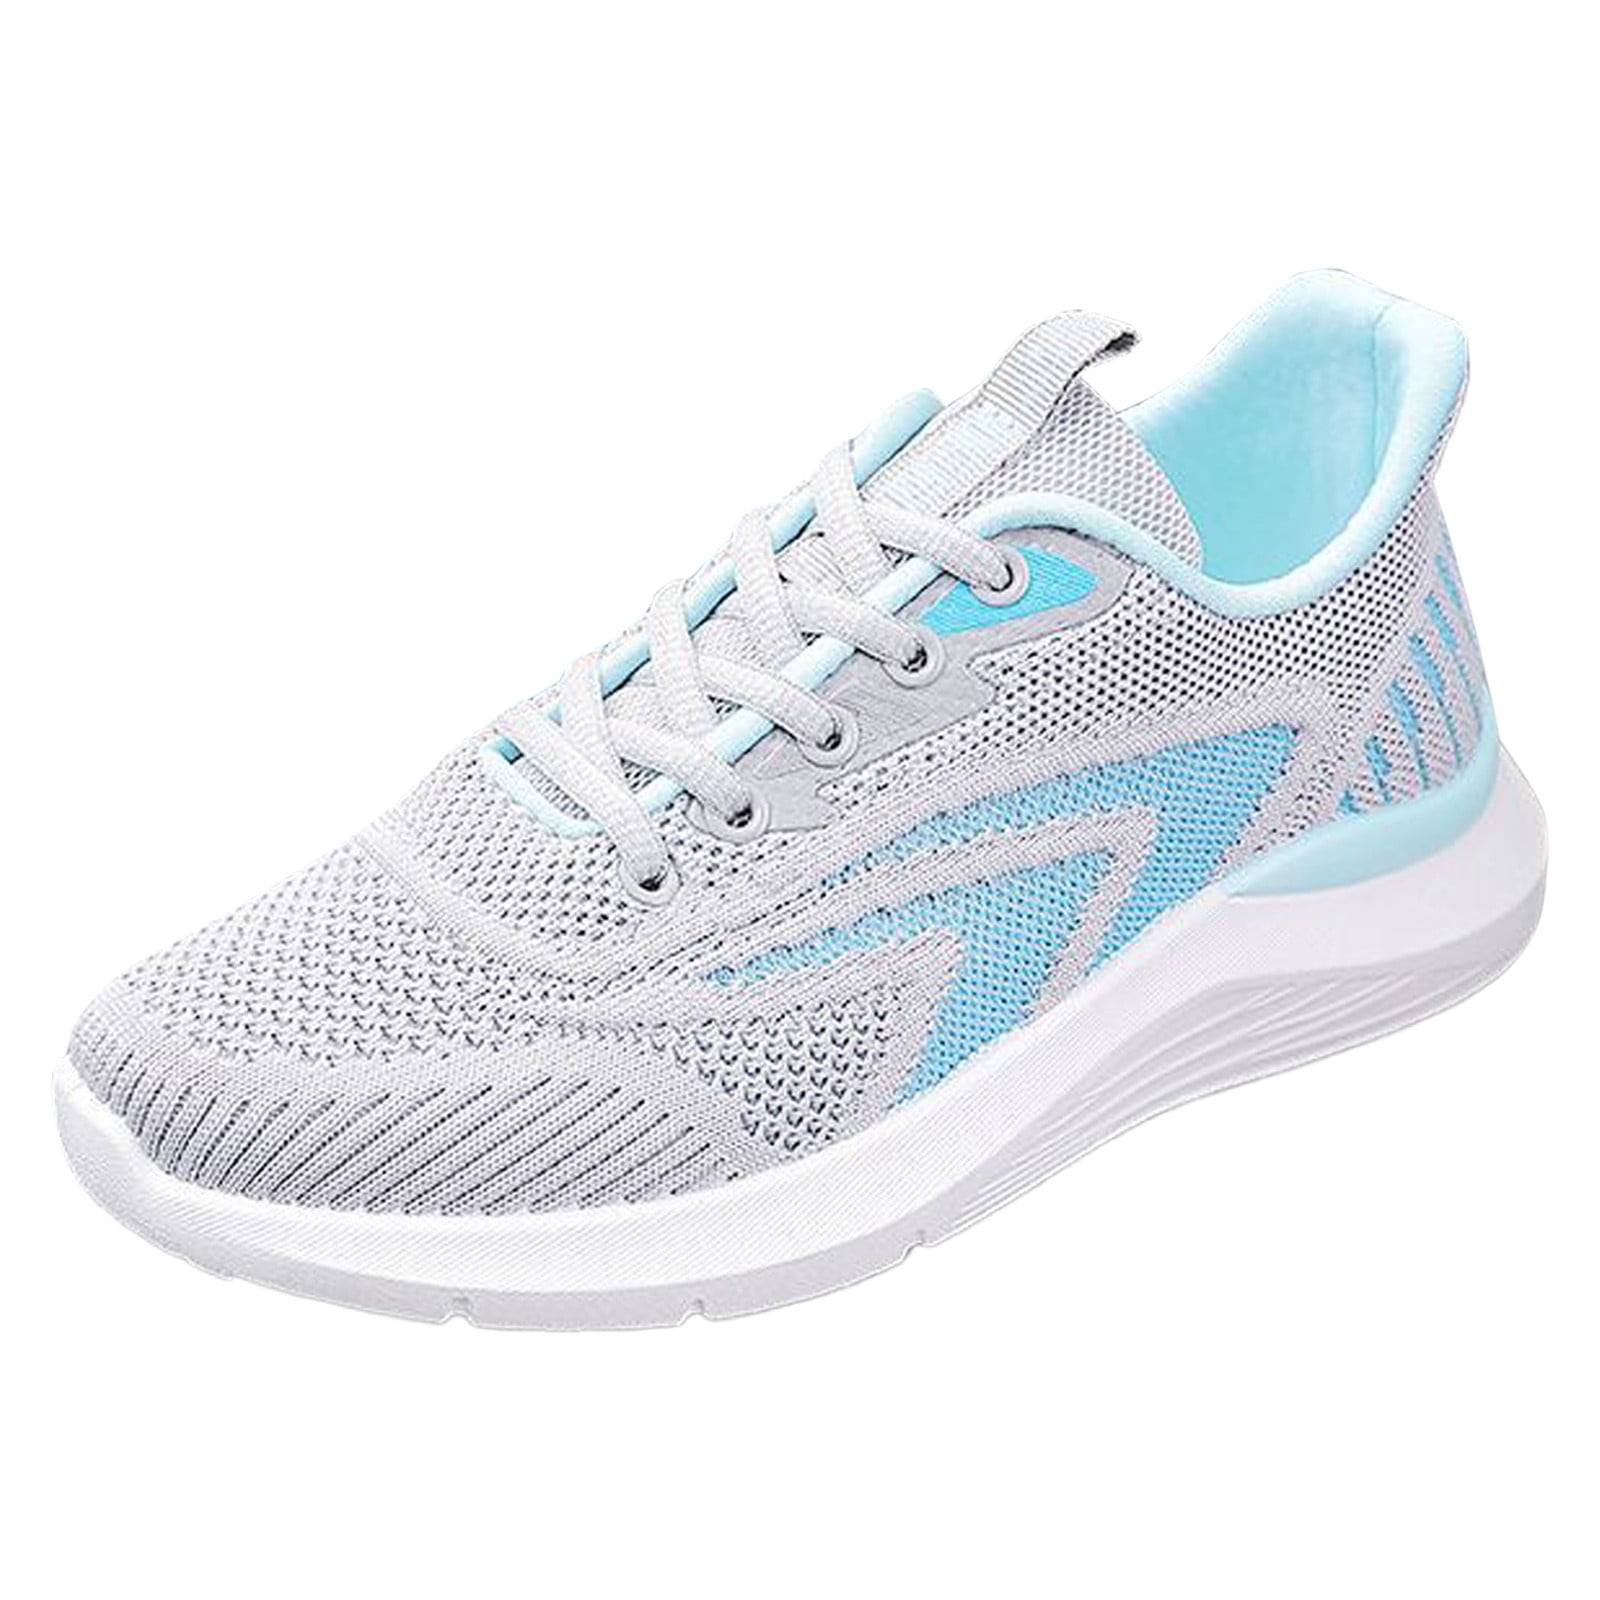 KaLI_store Womens Running Shoes Walking Shoes for Women Arch Support ...